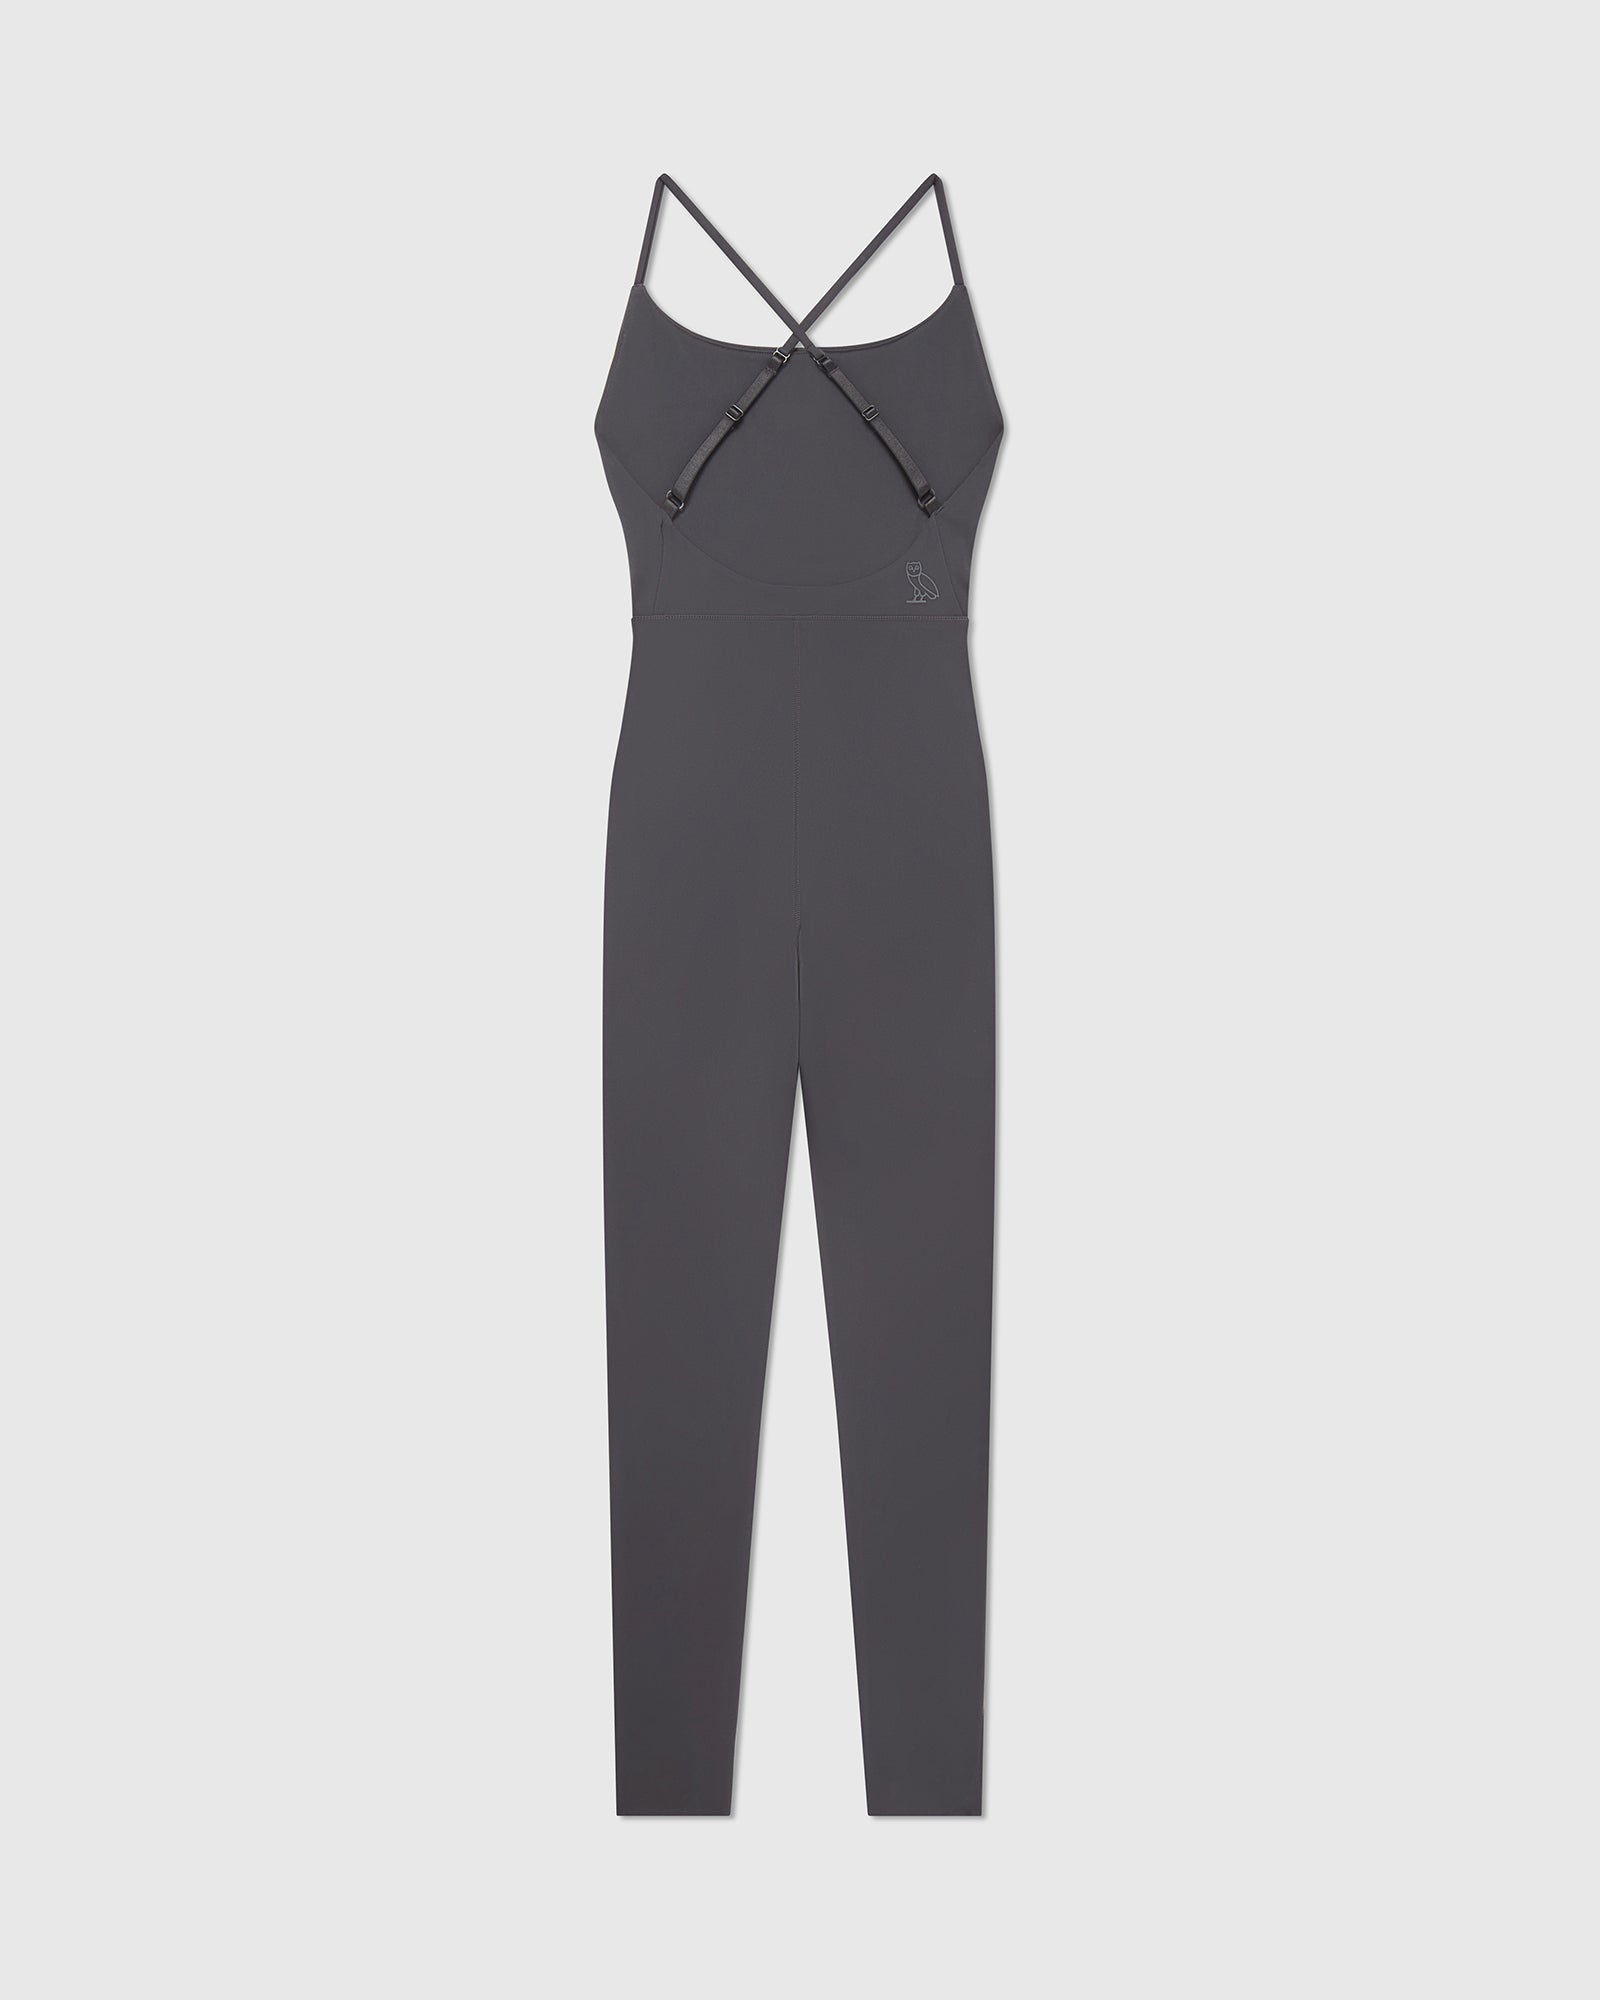 Cami Strap Catsuit - Charcoal